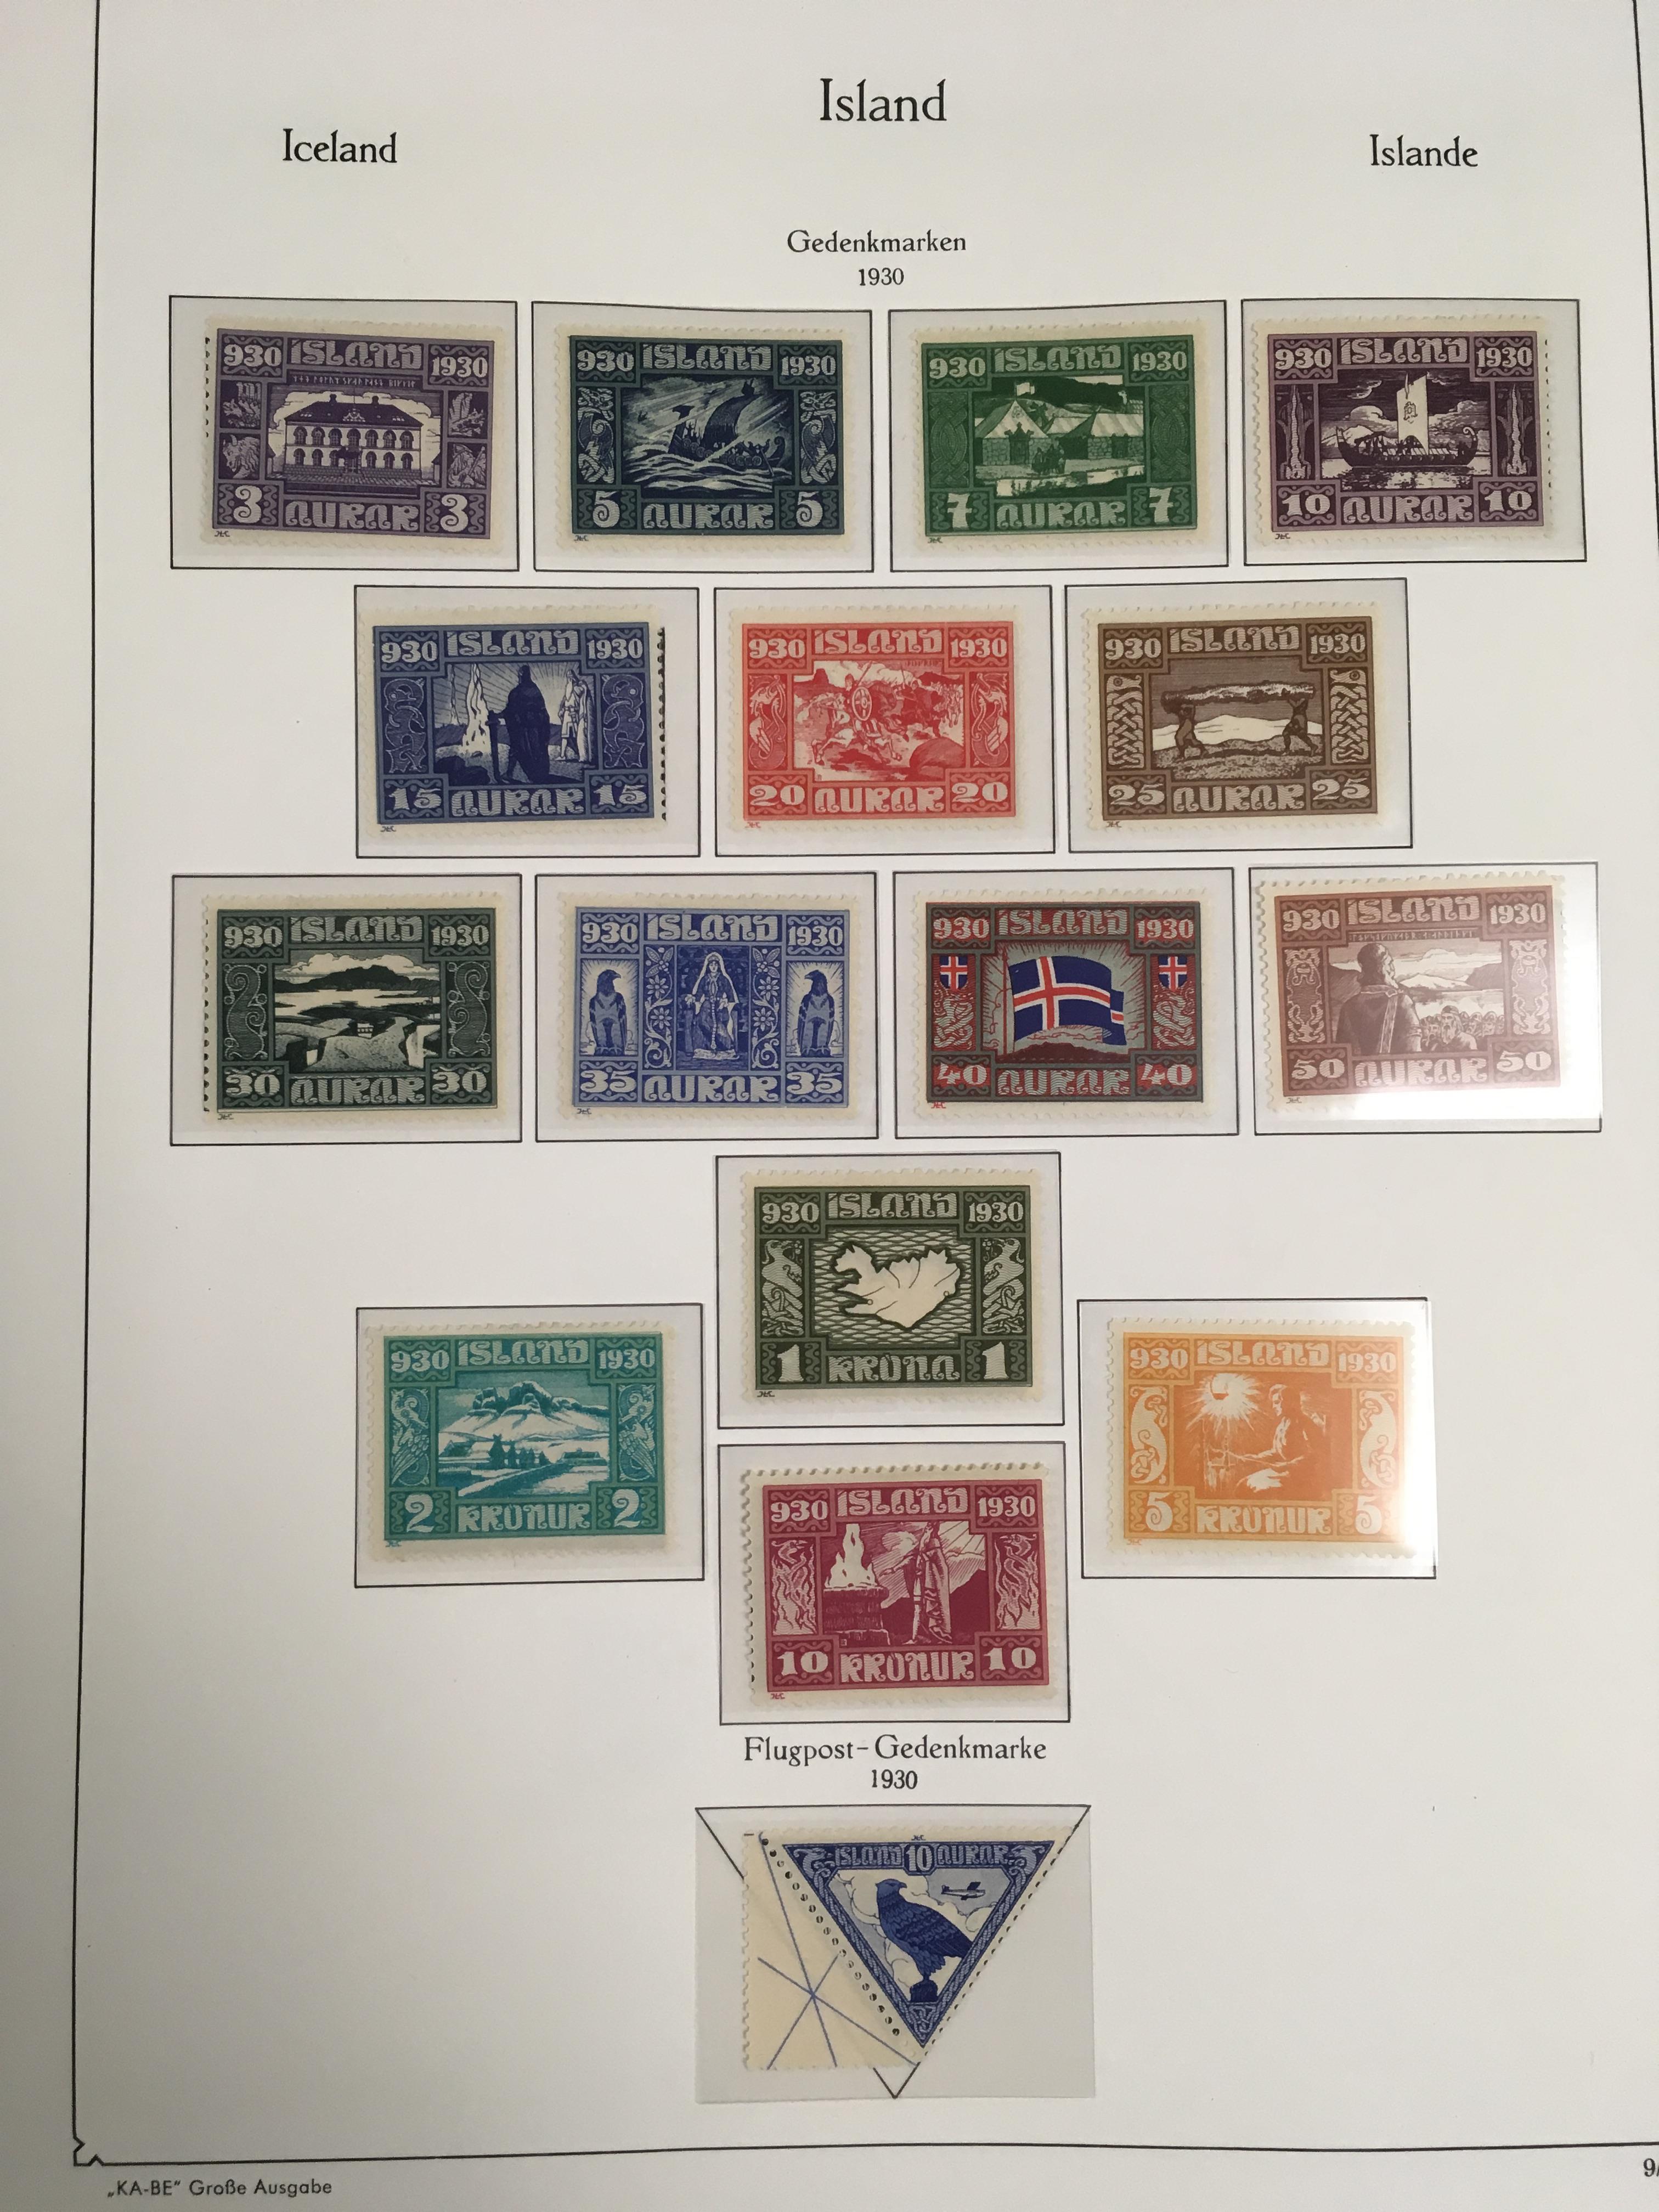 ICELAND: MAINLY MINT COLLECTION TO ABOUT 2000 IN TWO PRINTED ALBUMS, 1930 MILLENARY SET, OG 1931 ZEP - Image 2 of 2